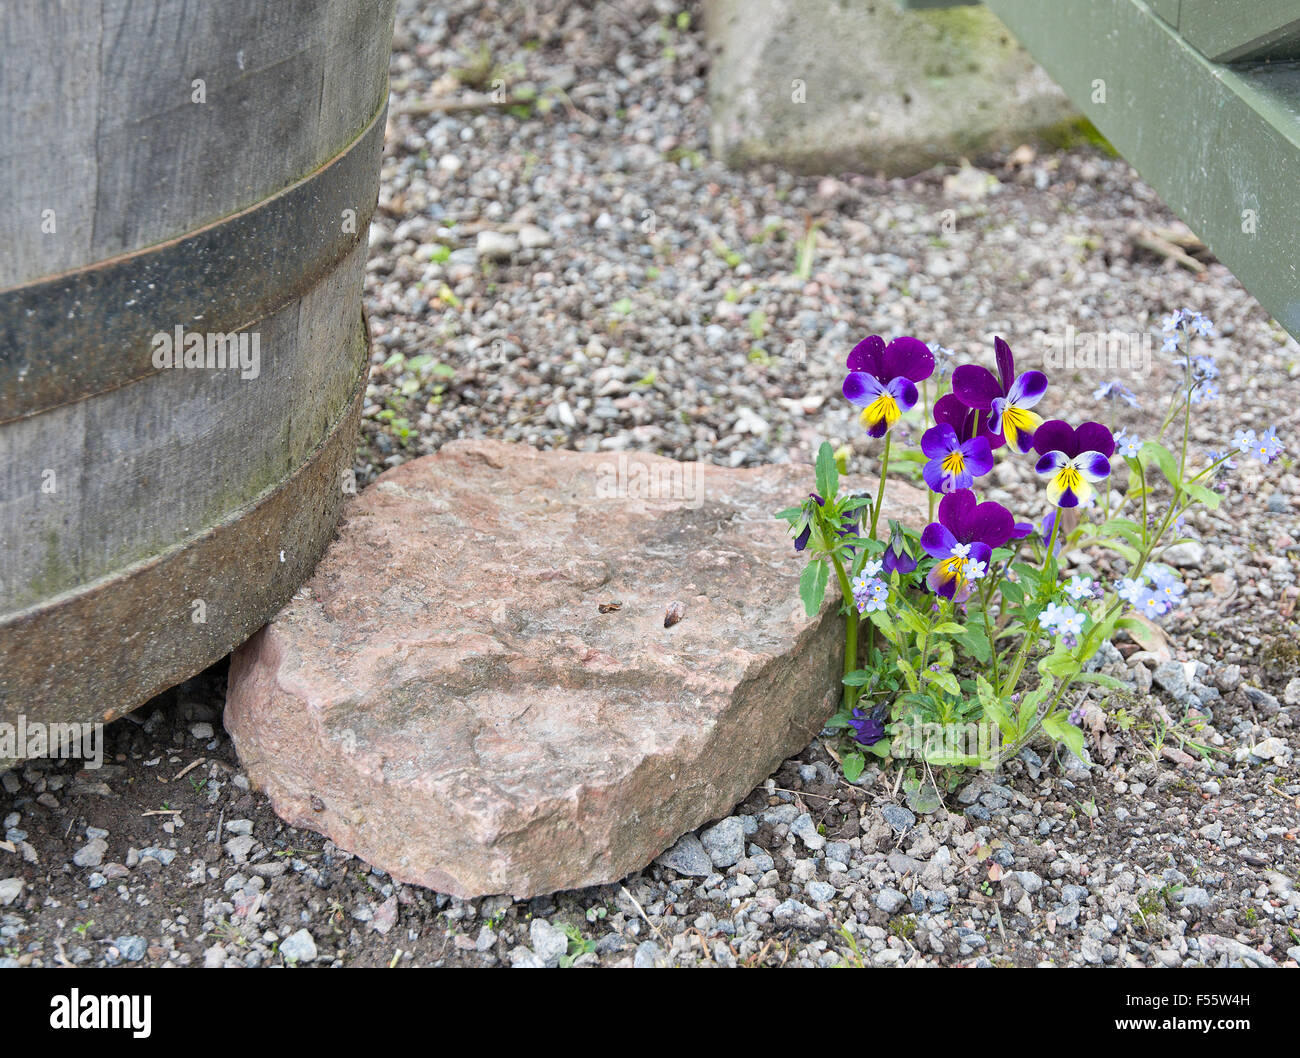 Violets growing in gravel near rock and bucket Stock Photo